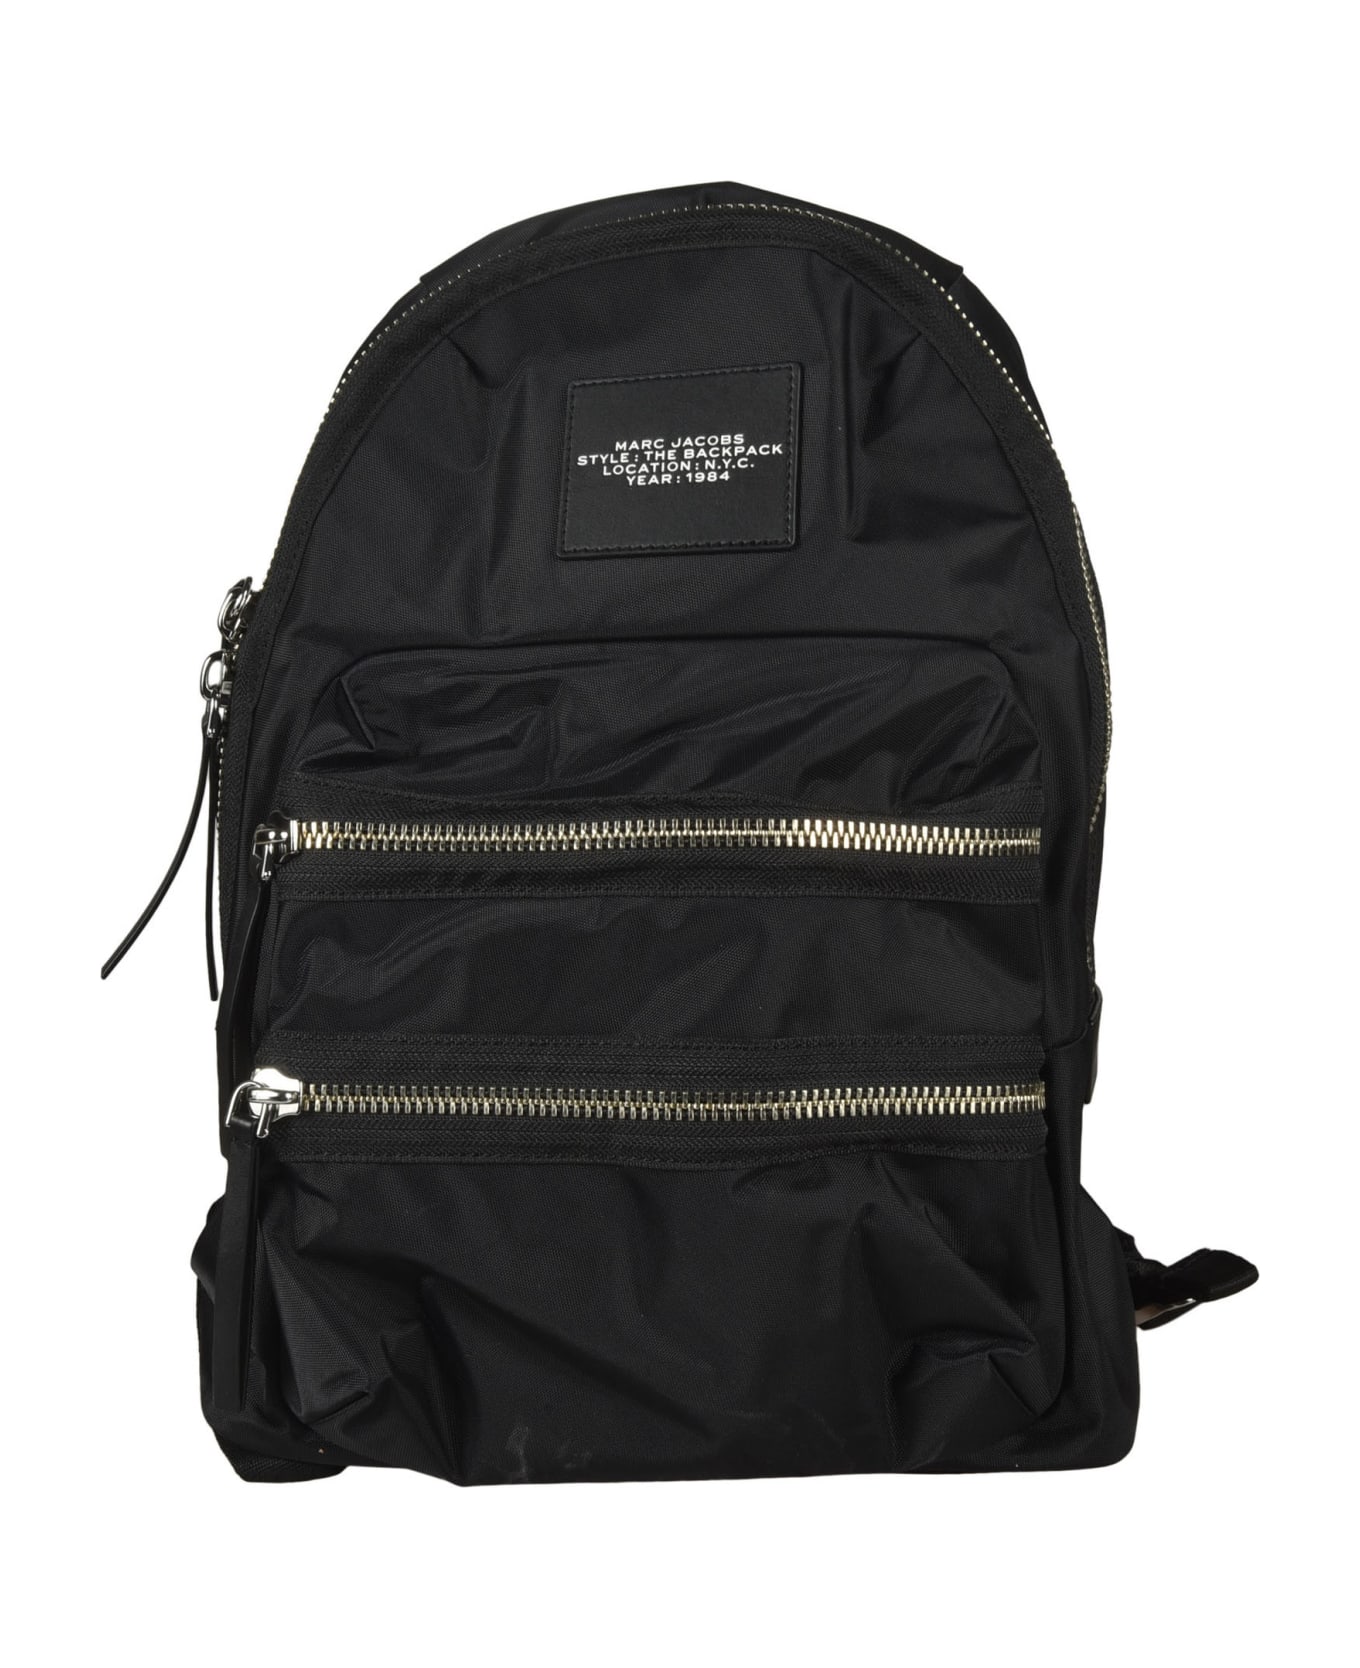 Marc Jacobs Logo Patched Backpack - Black